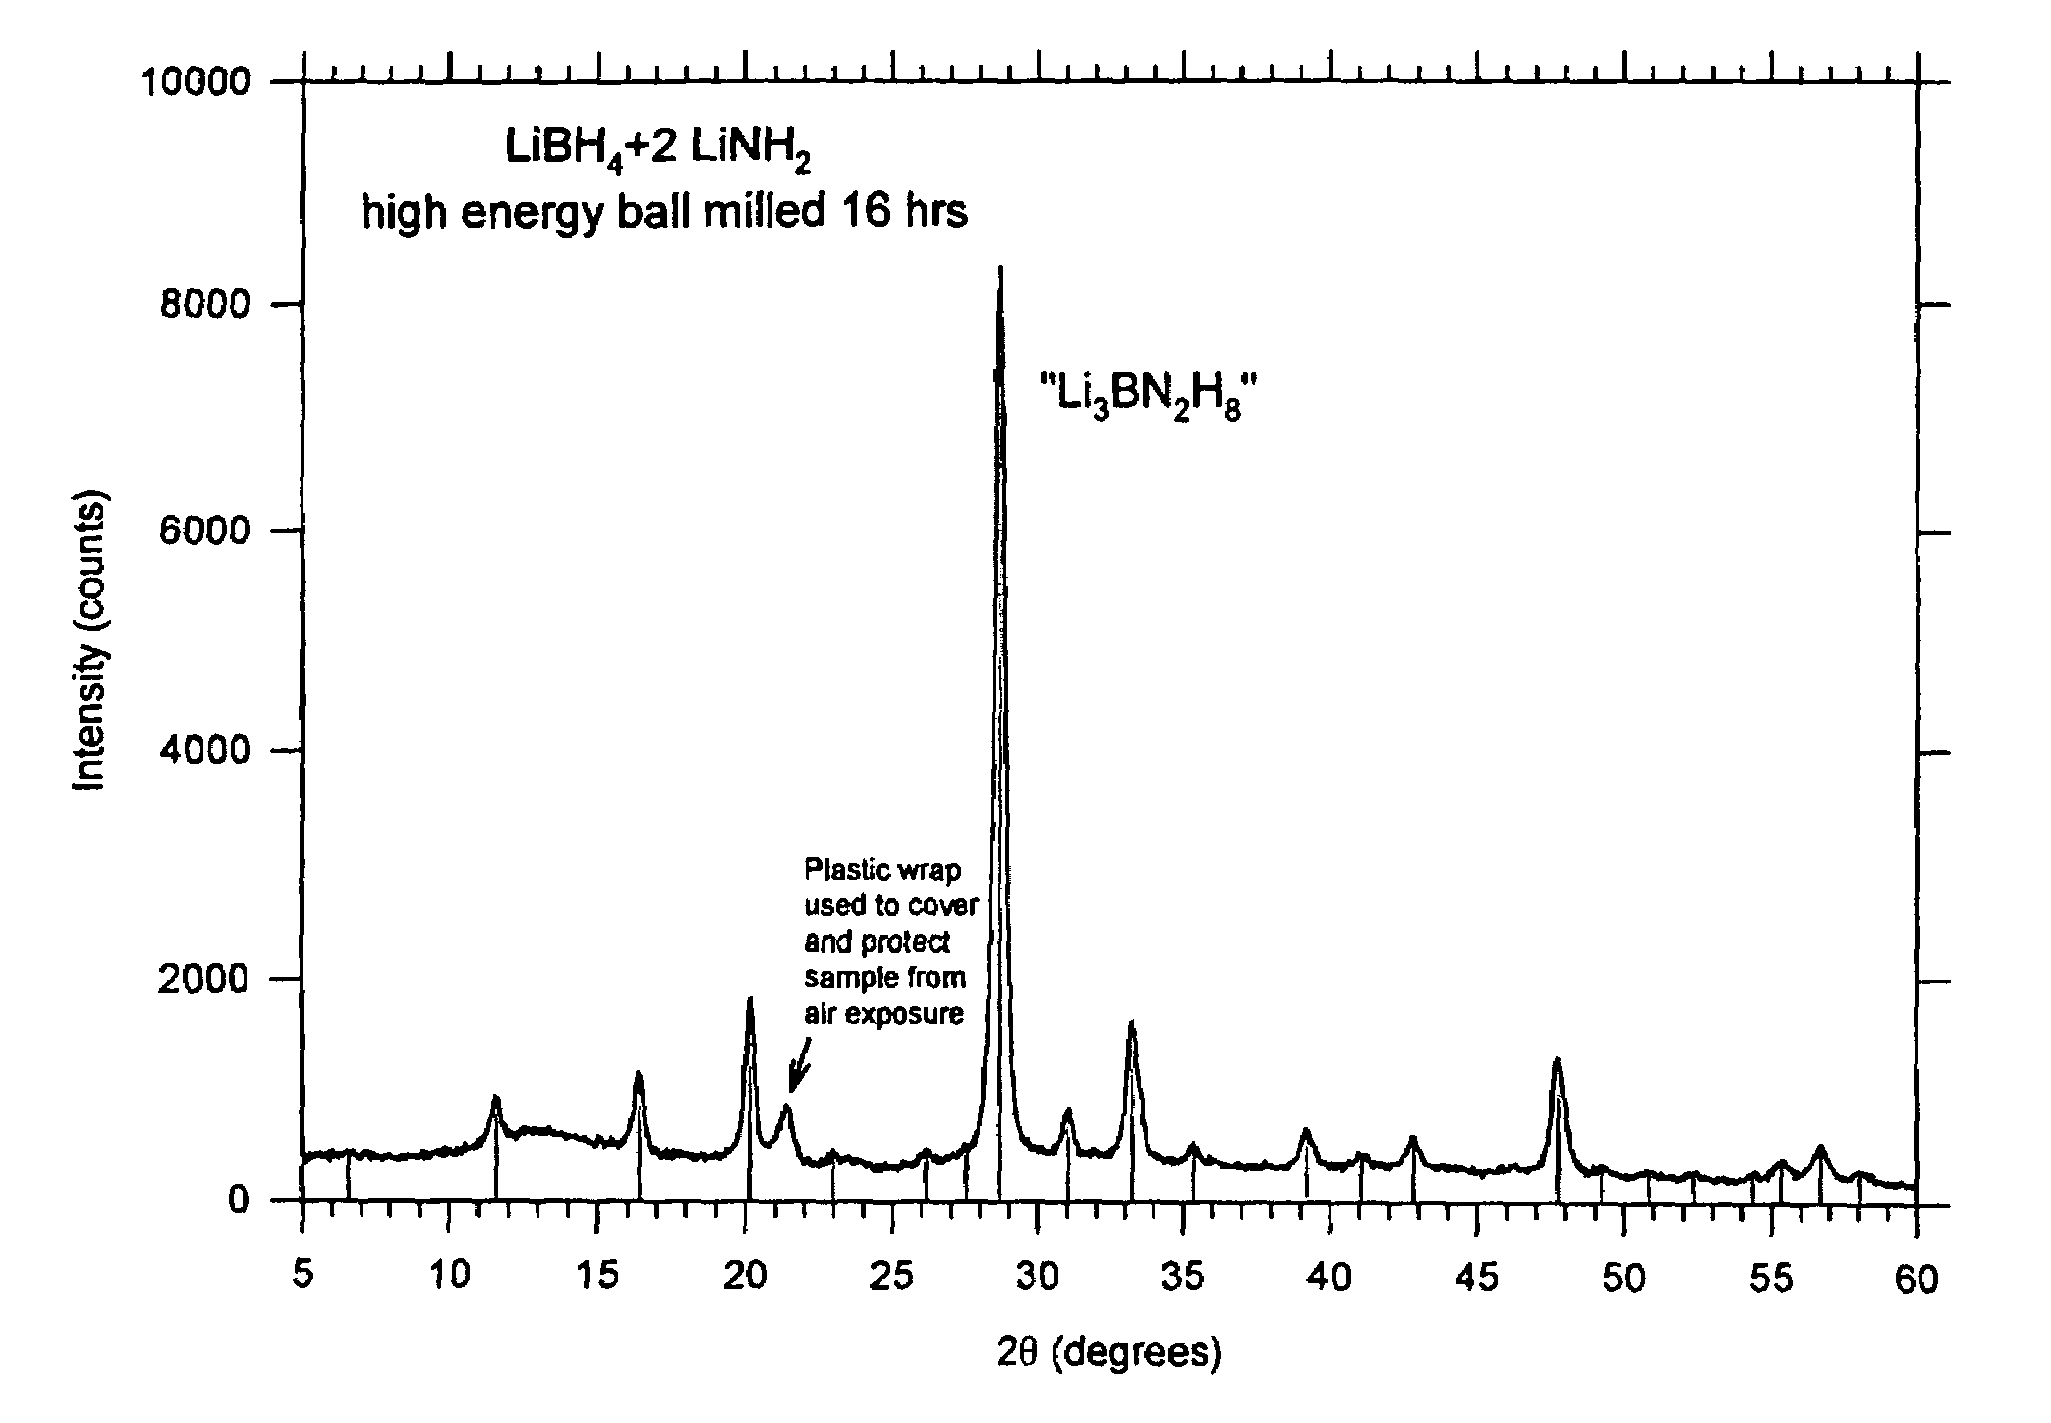 Mixed hydrogen generation material